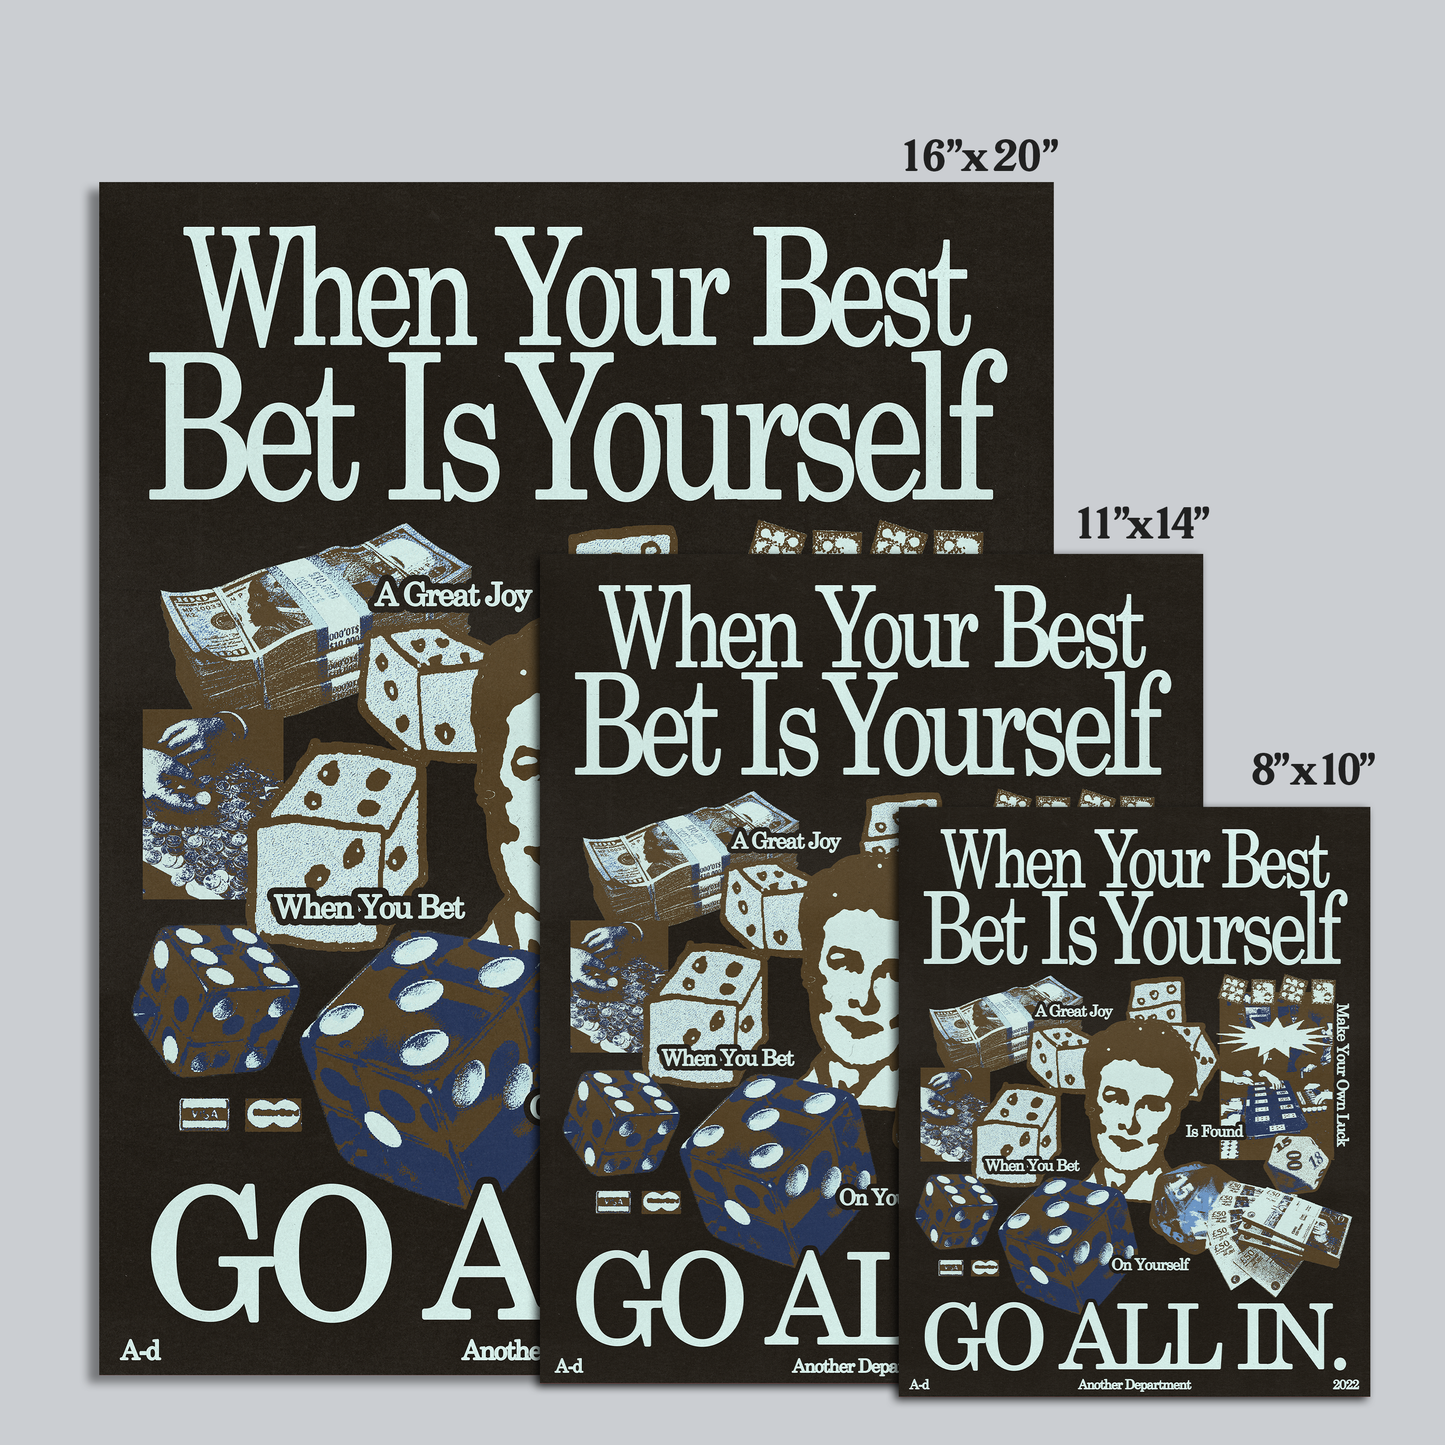 098 - Bet on Yourself